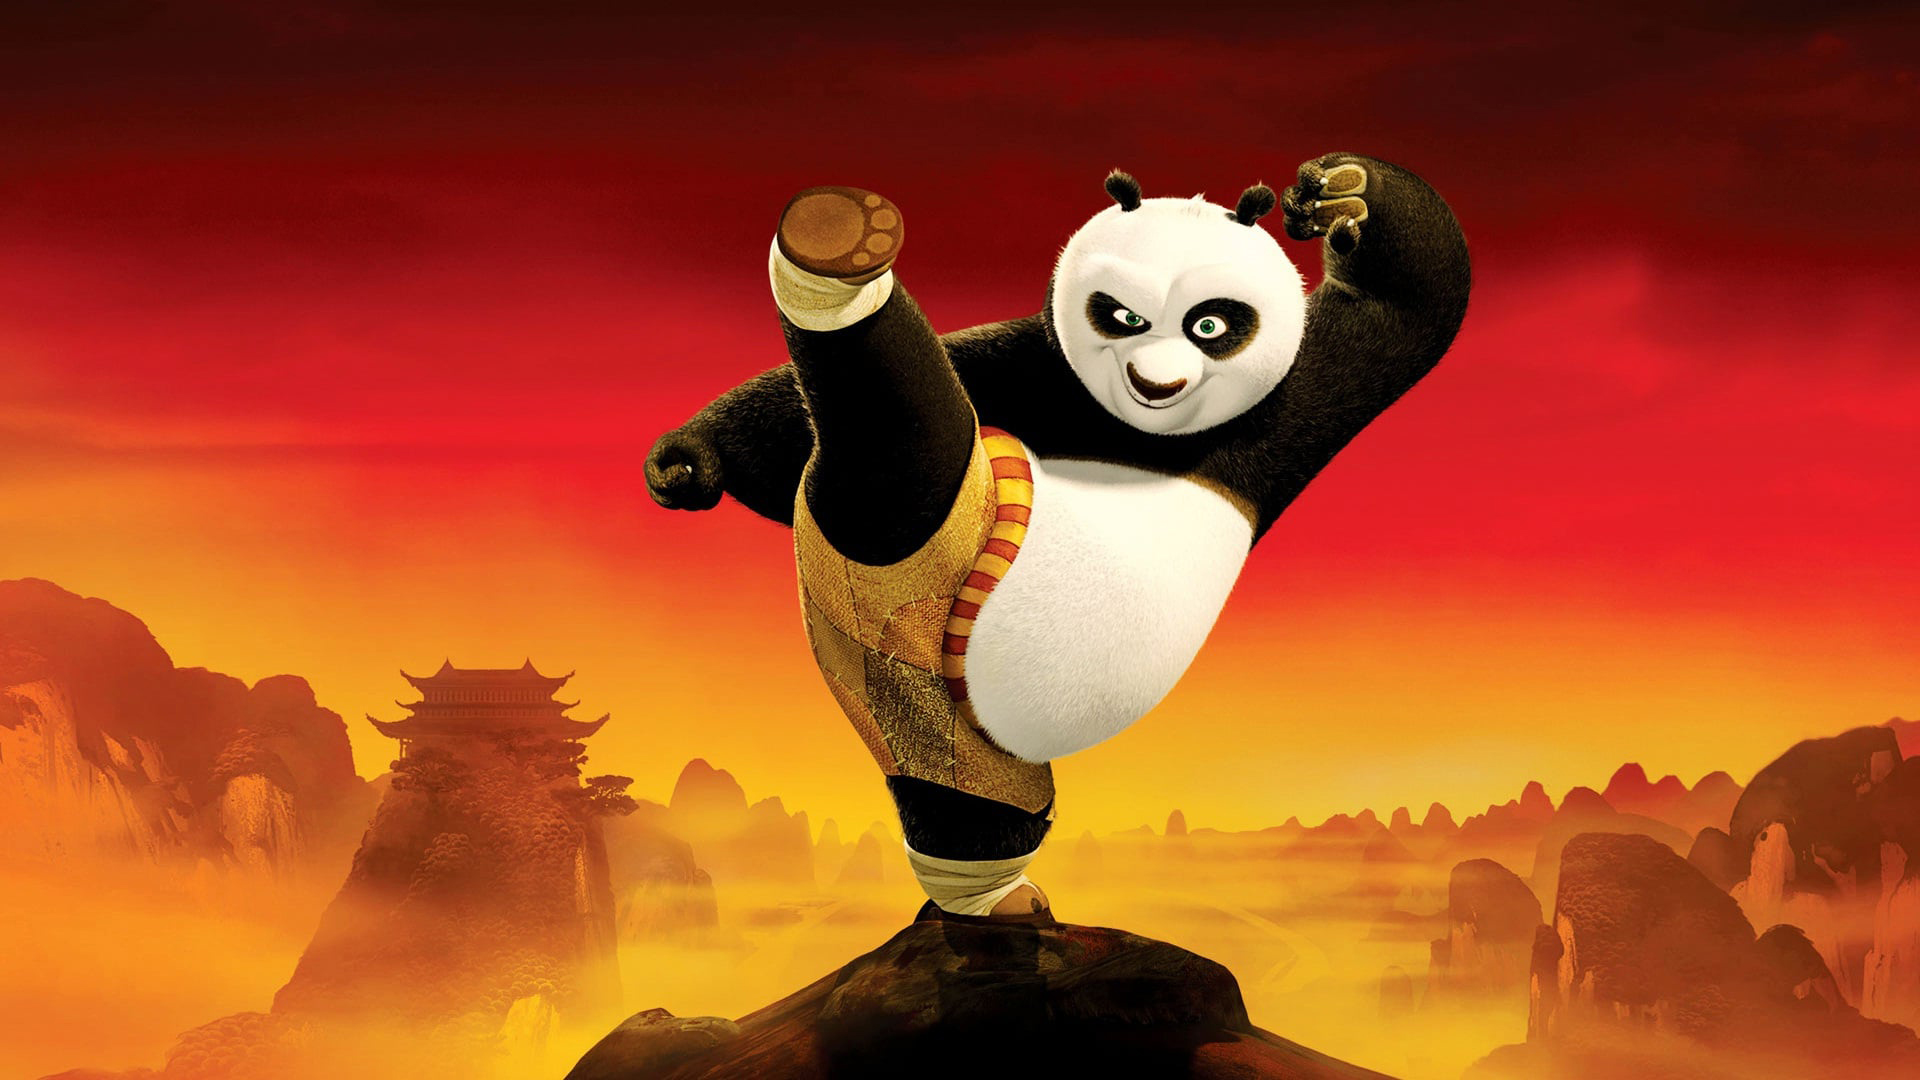 Kung Fu Panda 3 Free Wallpapers for Desktop HD Movie Backgrounds